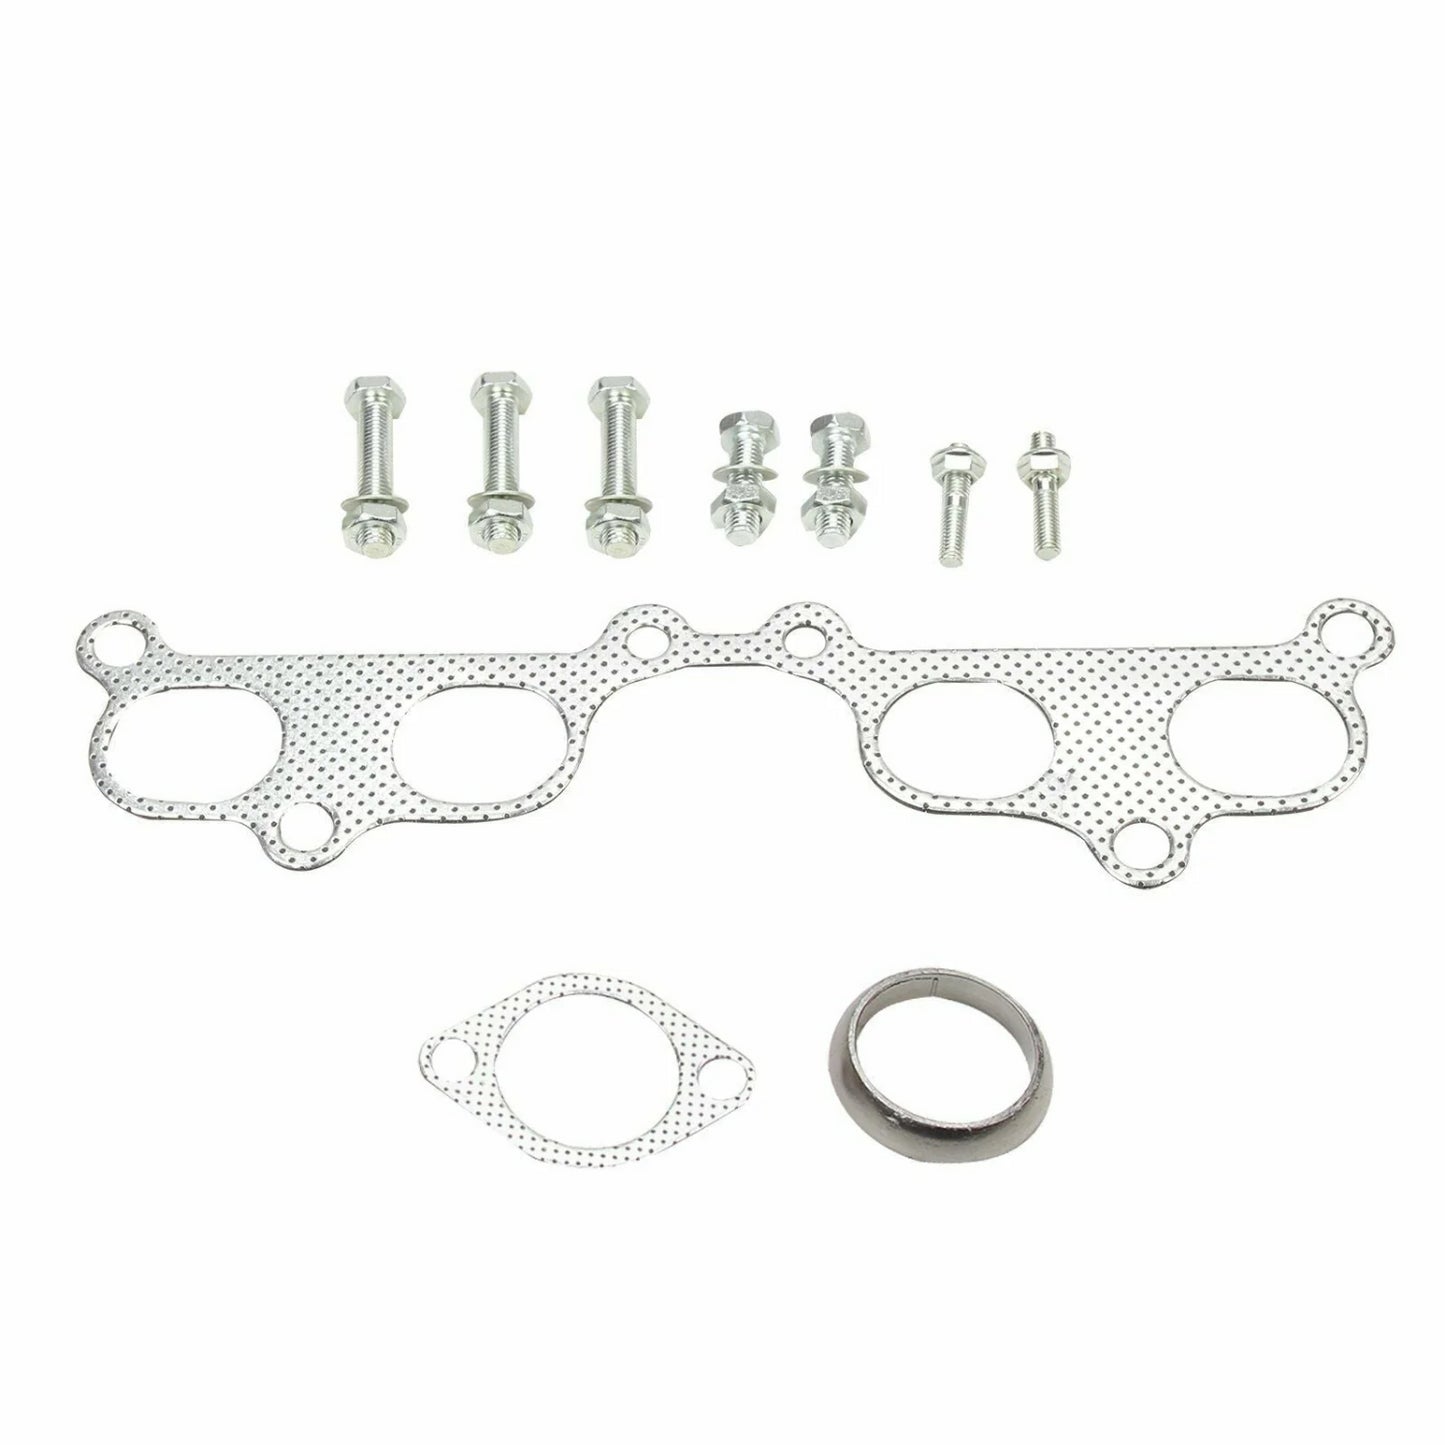 Exhaust Manifold Header for Toyota Tacoma 95-01 2.4L 2.7L L4